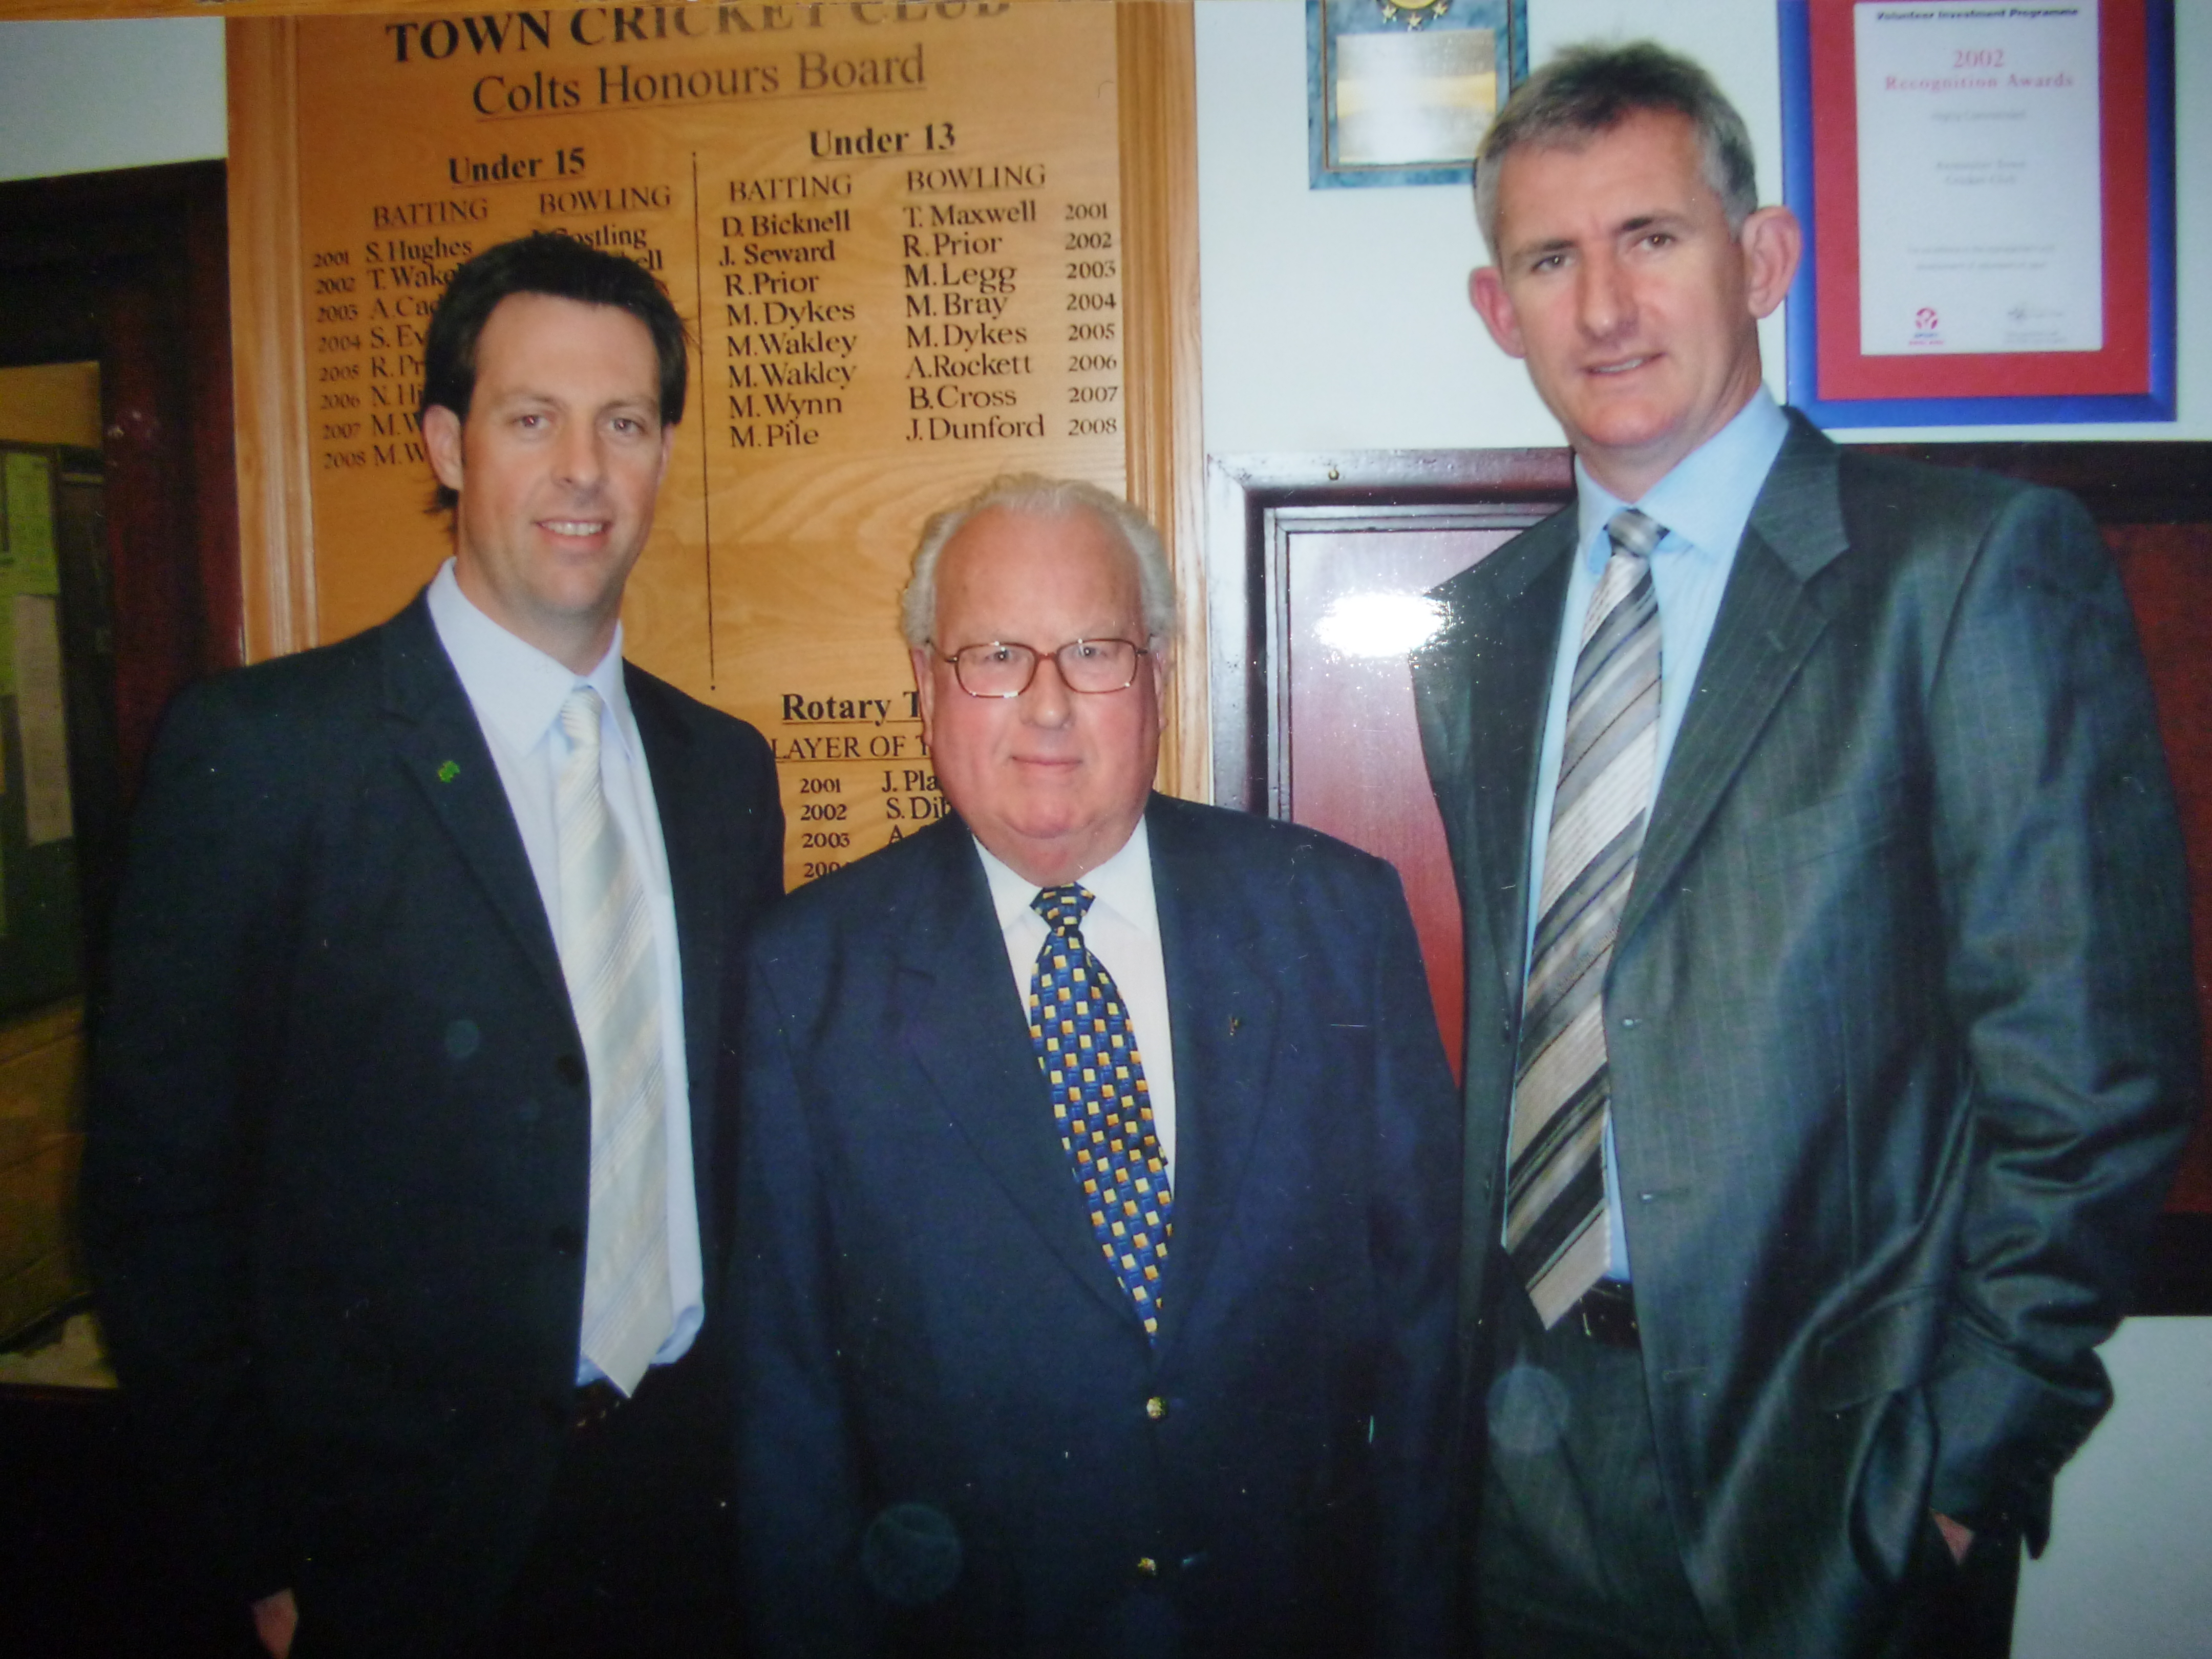 President of Axminster Town Cricket Club Les Haynes pictured with Marcus Trescothickl and Andrew Caddick